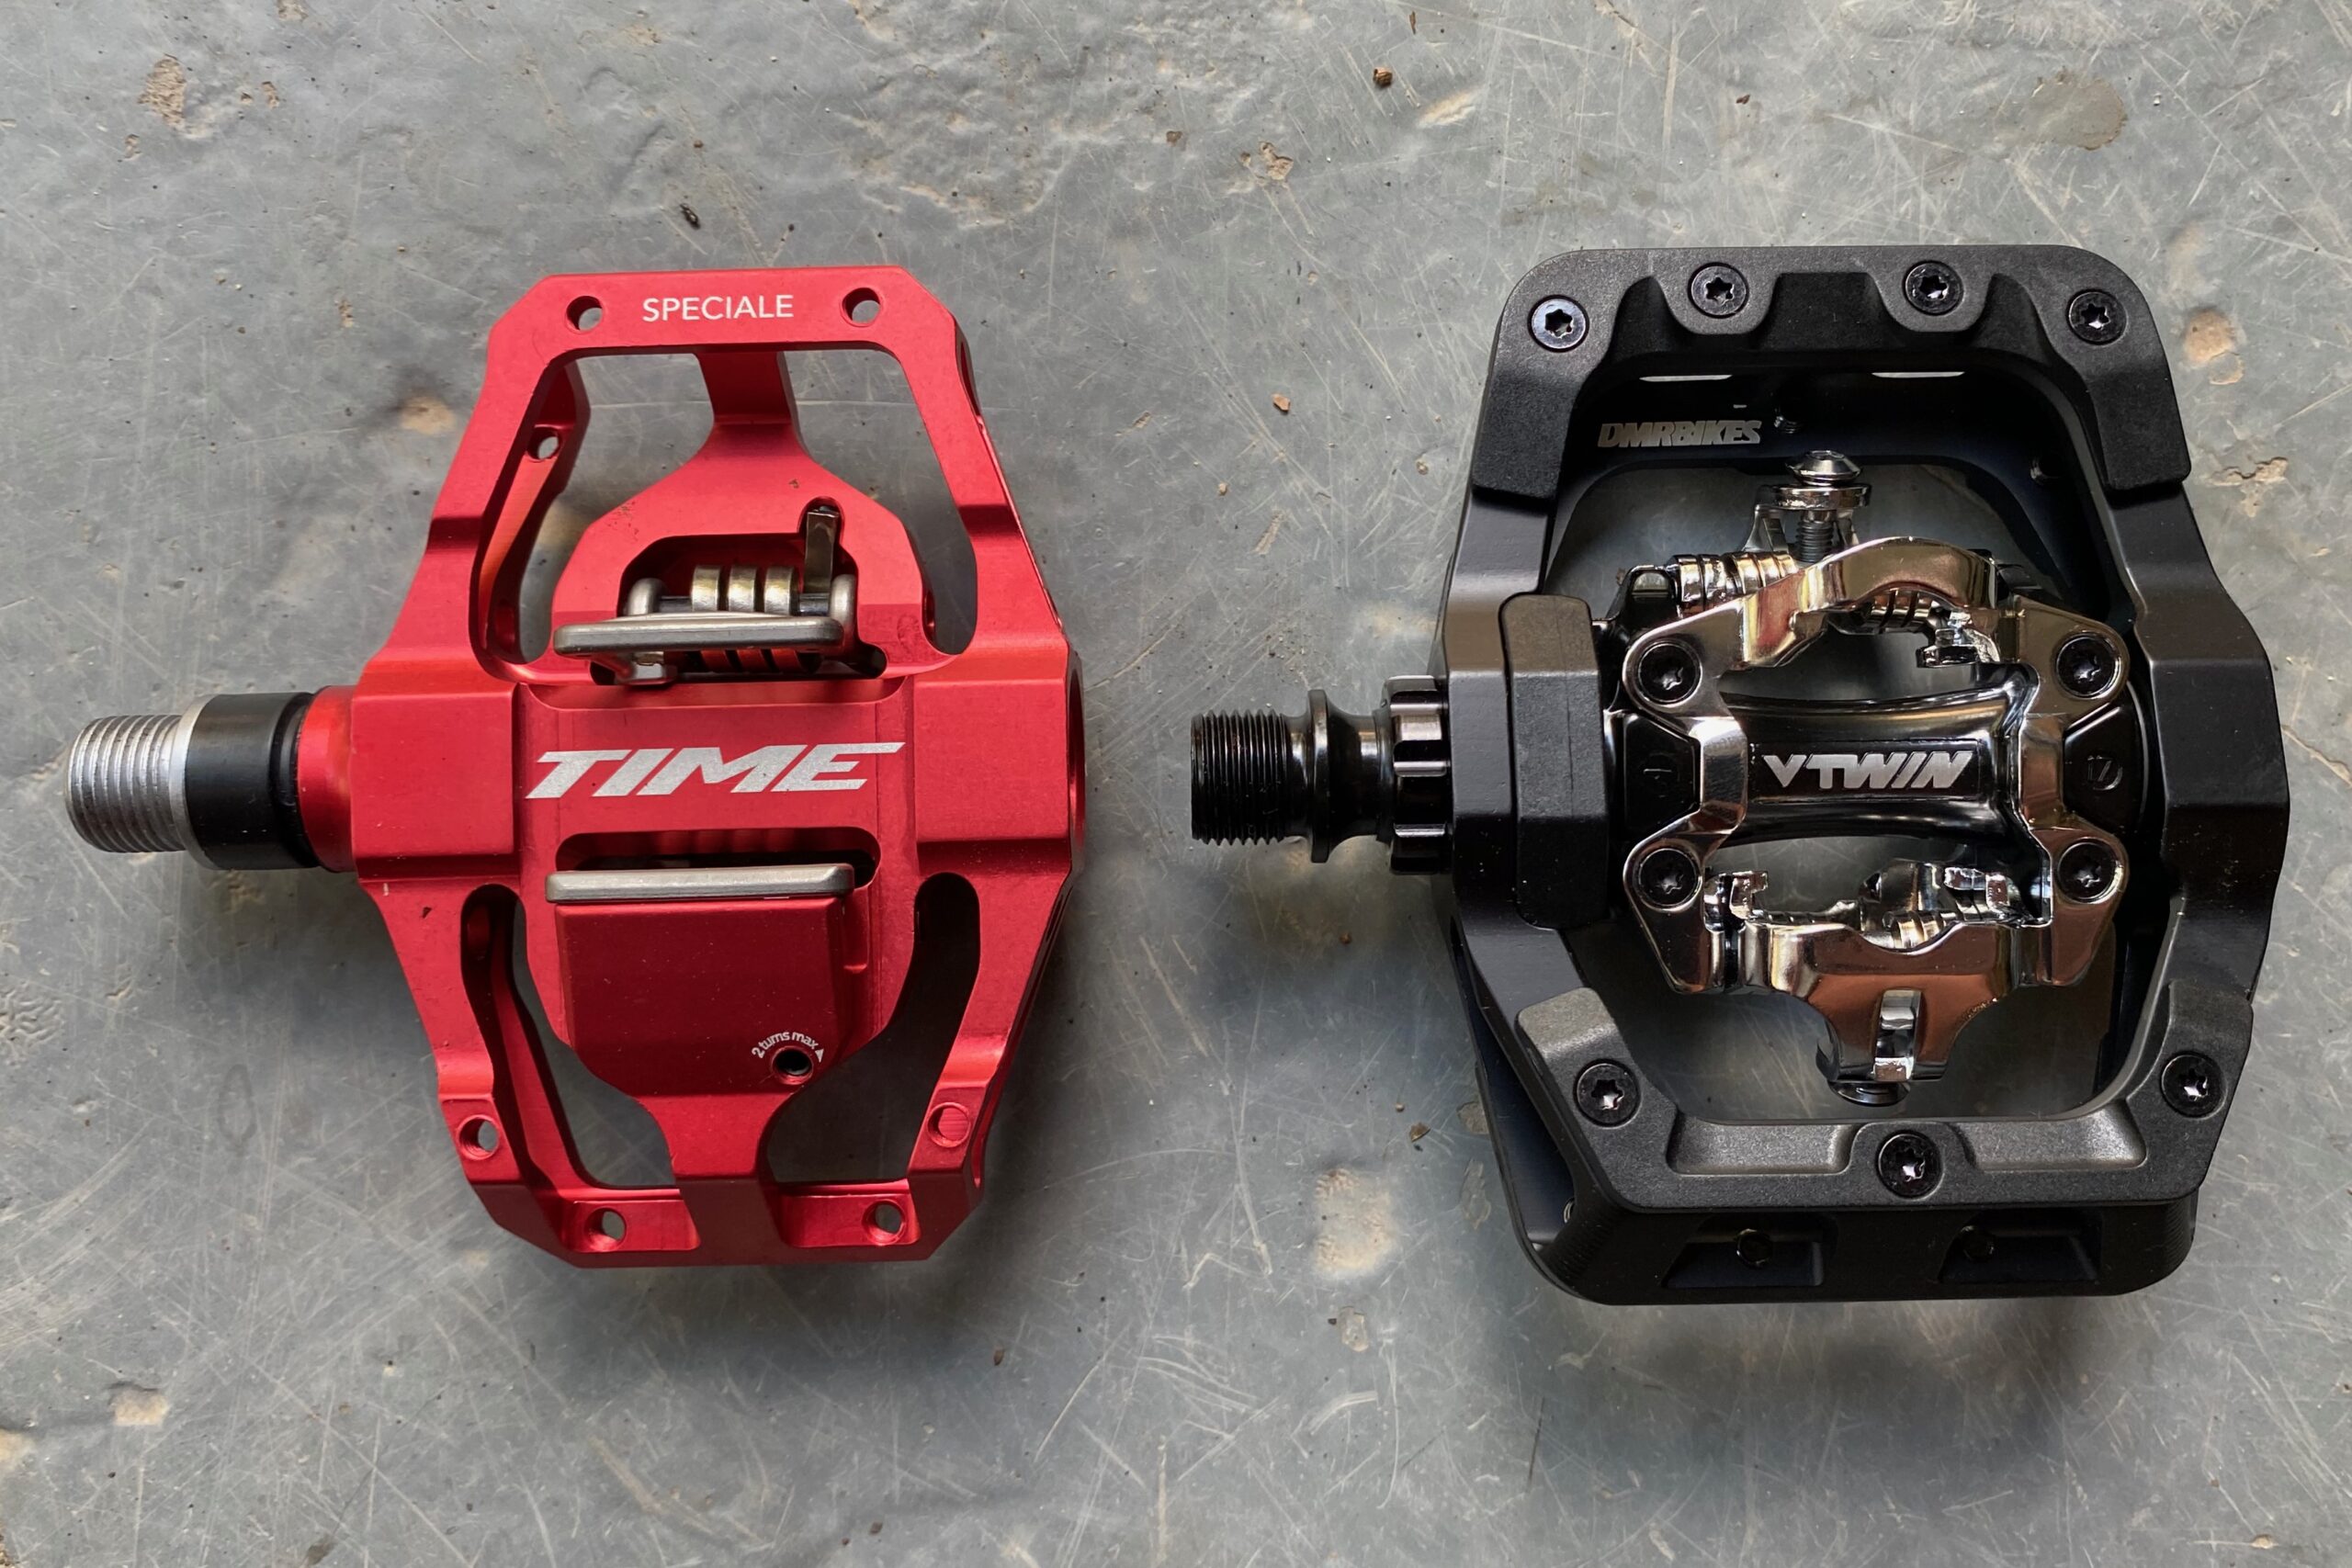 Examples of mountain bike pedals for gravity riding